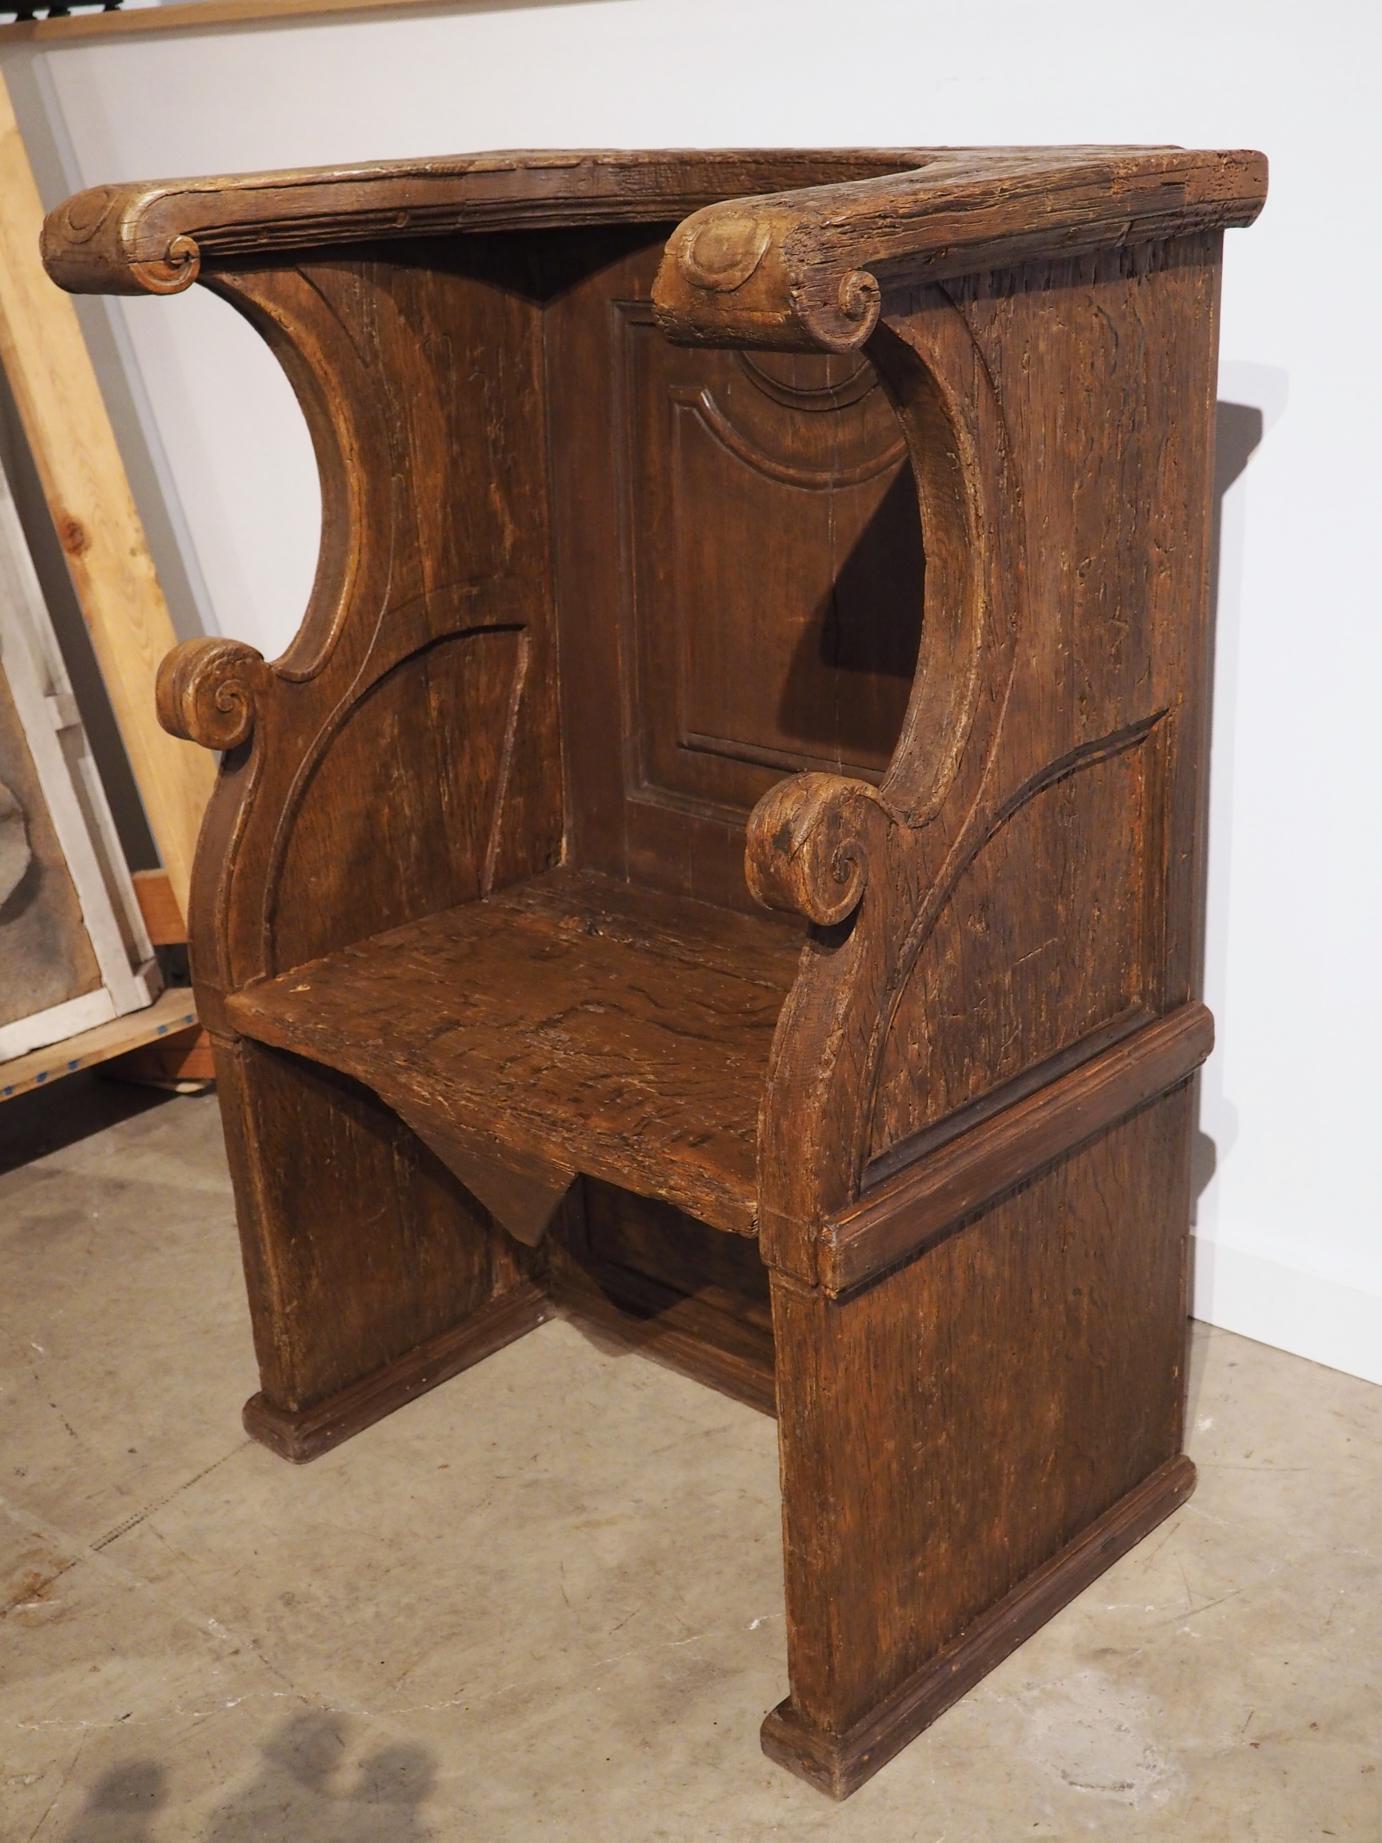 From Portugal in the 1600’s, this choir seat has a flip-top seat known as a misericord, or mercy seat. As with most antique cathedral seating, the chair places a premium on functionality, with carved embellishments at a minimum, allowing the molding